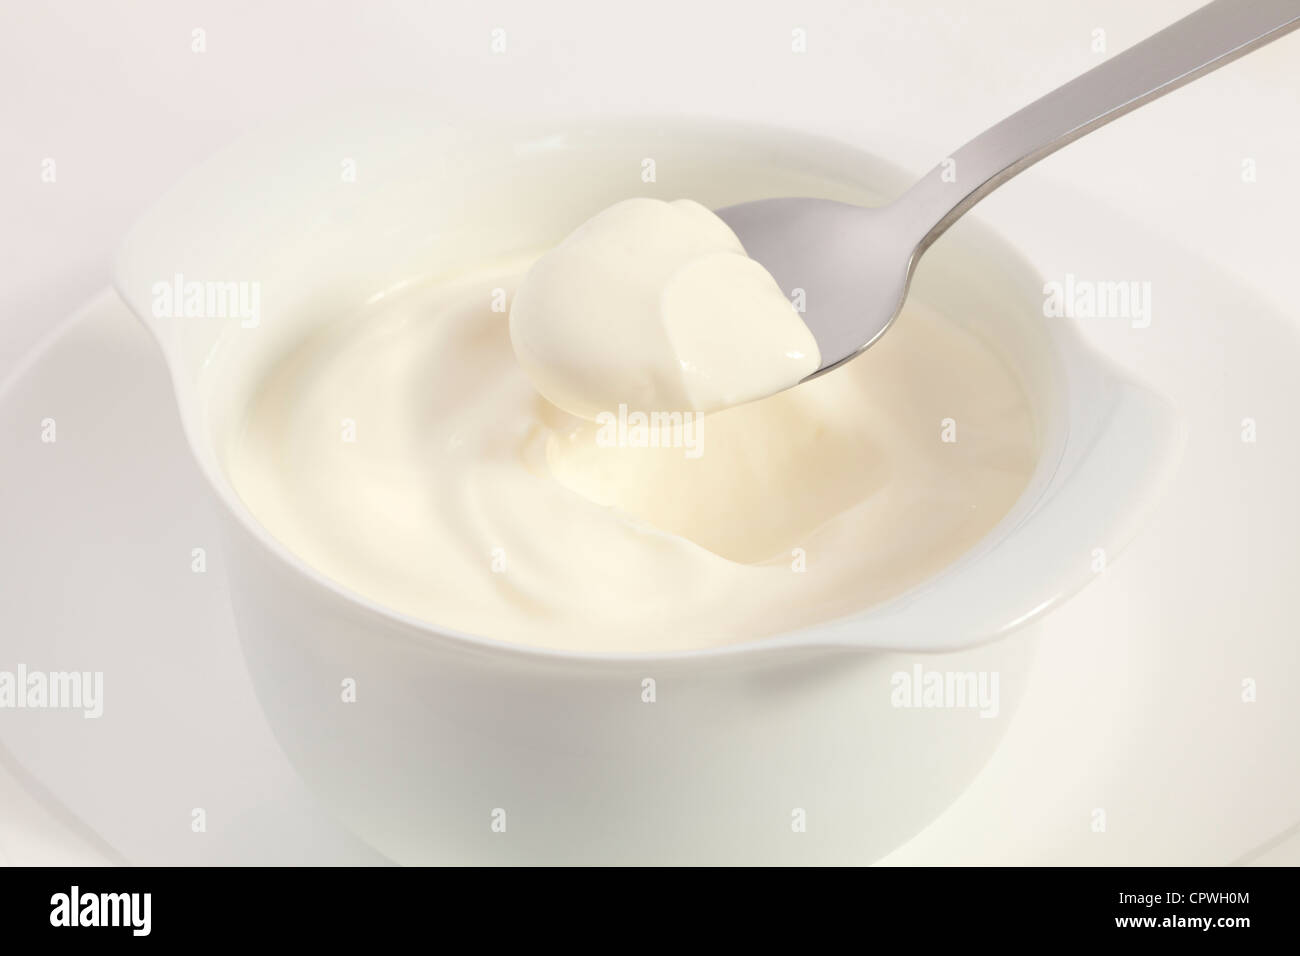 A spoonful of Greek yoghurt being lifted from a bowl. White on white. Stock Photo